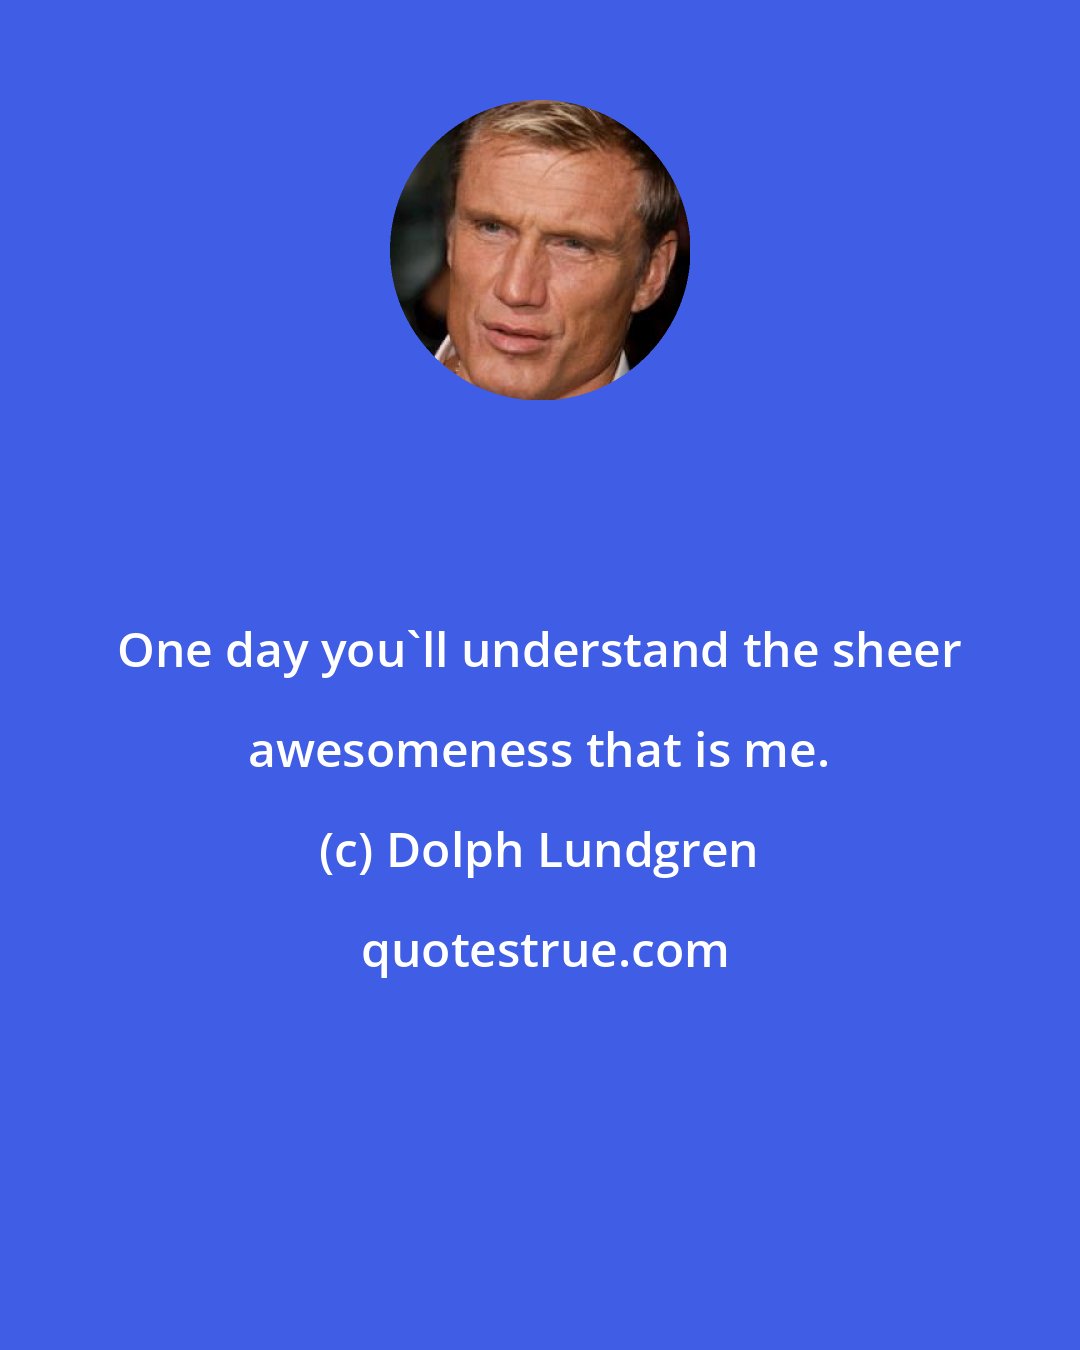 Dolph Lundgren: One day you'll understand the sheer awesomeness that is me.